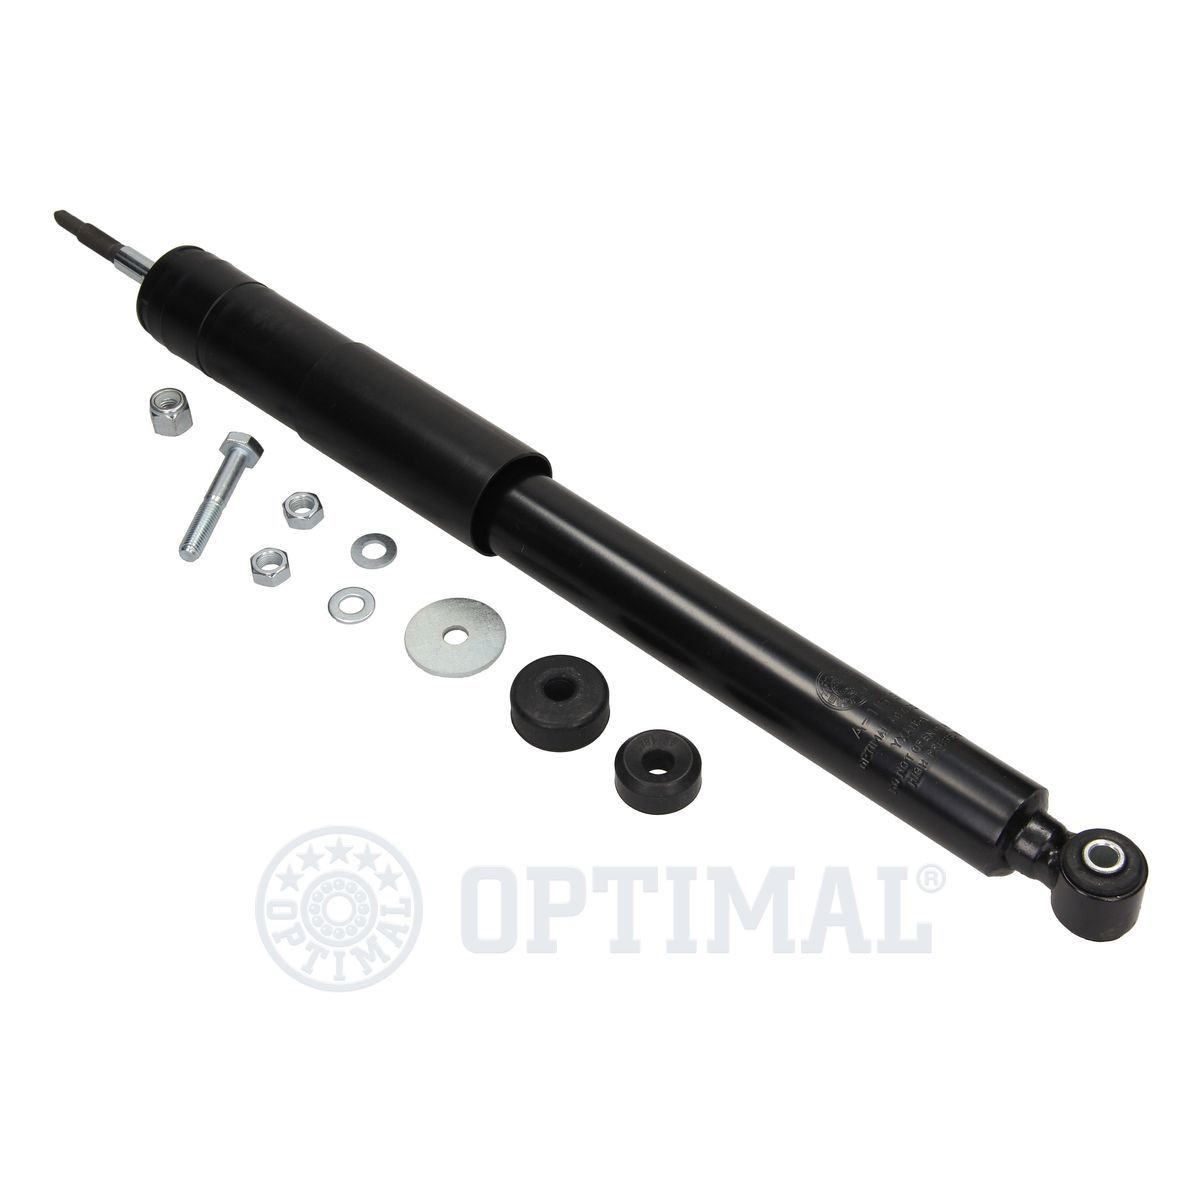 OPTIMAL A-1151G Shock absorber Front Axle, Gas Pressure, Twin-Tube, Spring-bearing Damper, Bottom eye, Top pin